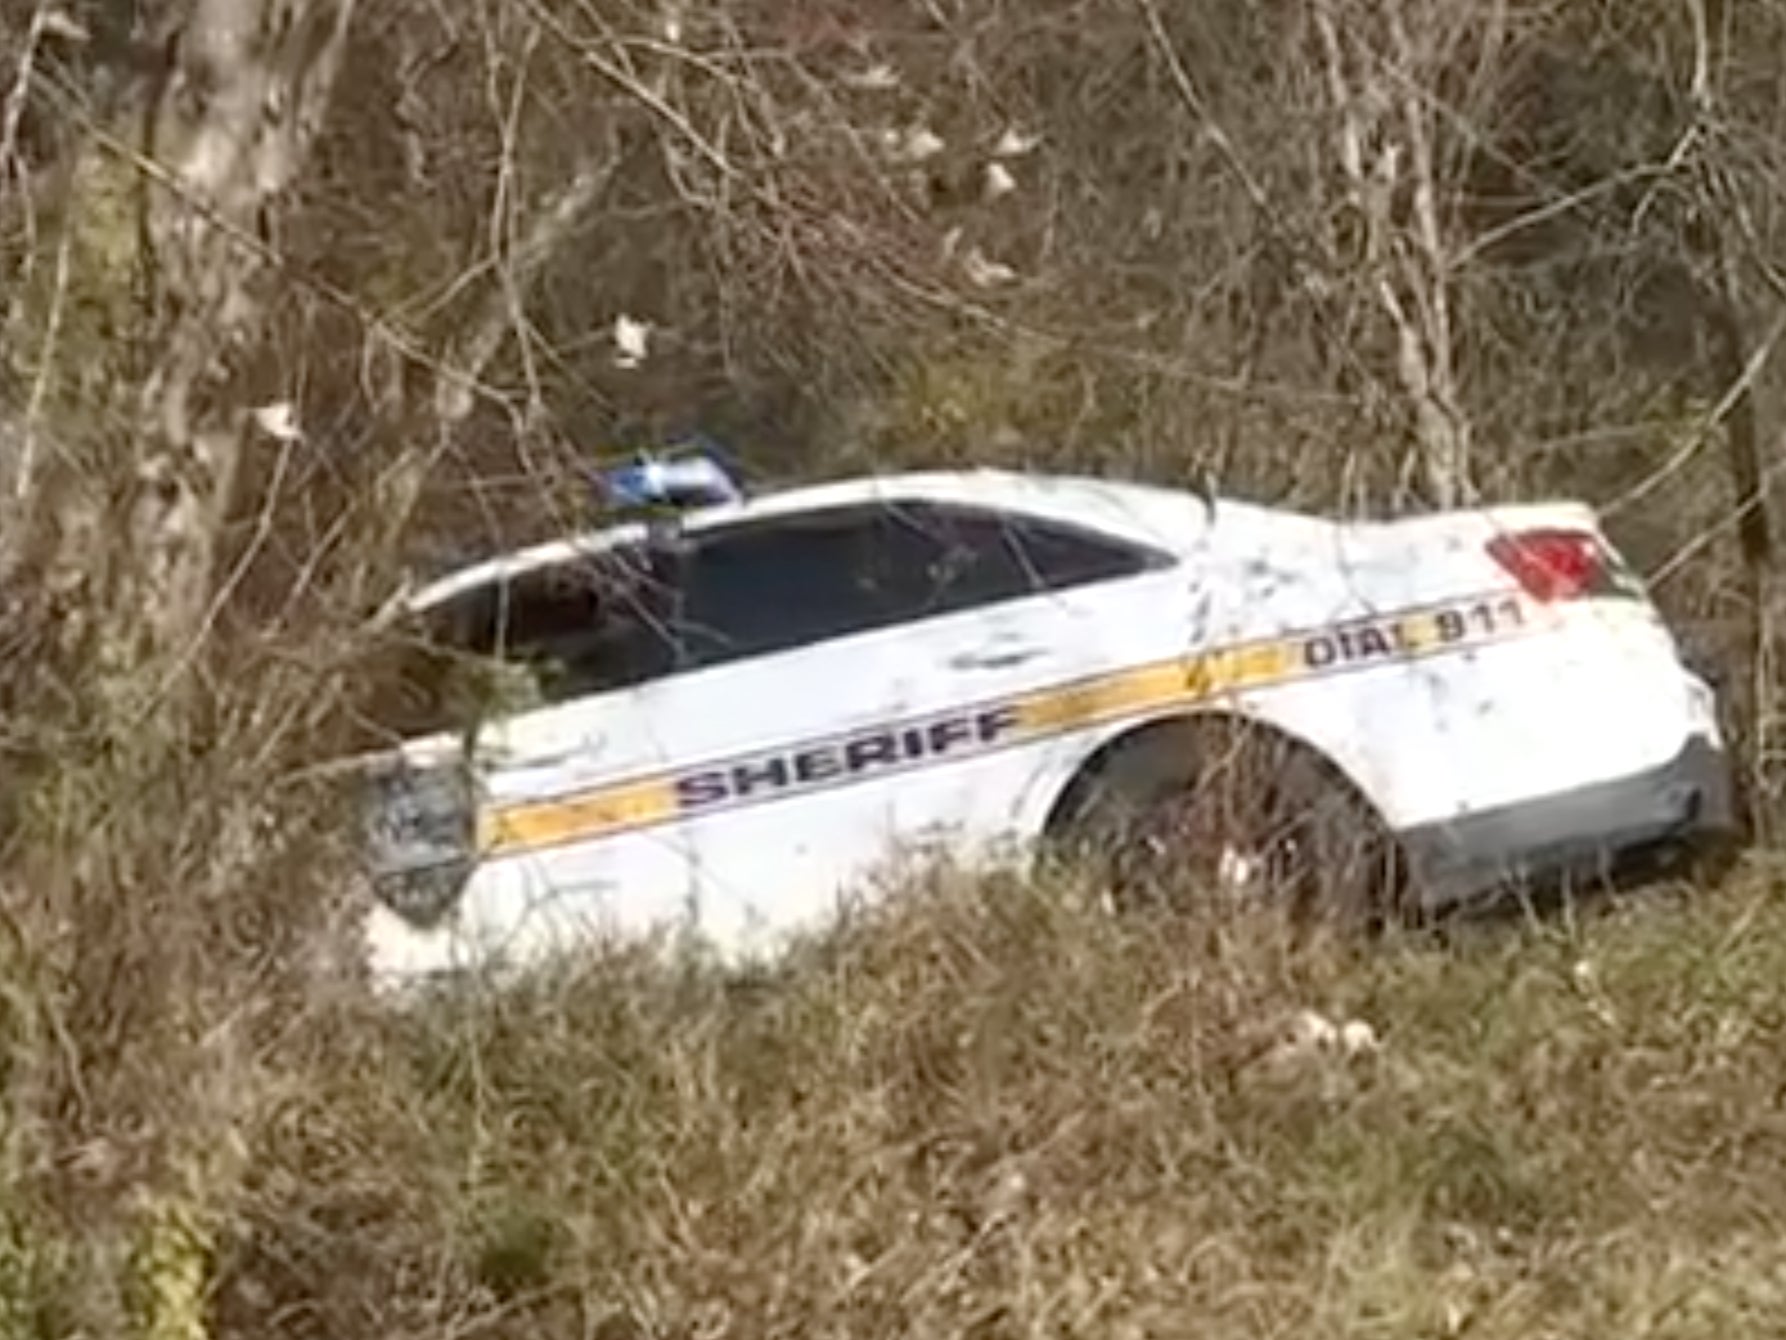 The marked police car allegedly crashed by Joshua Shenker on Thursday 21 January 2021